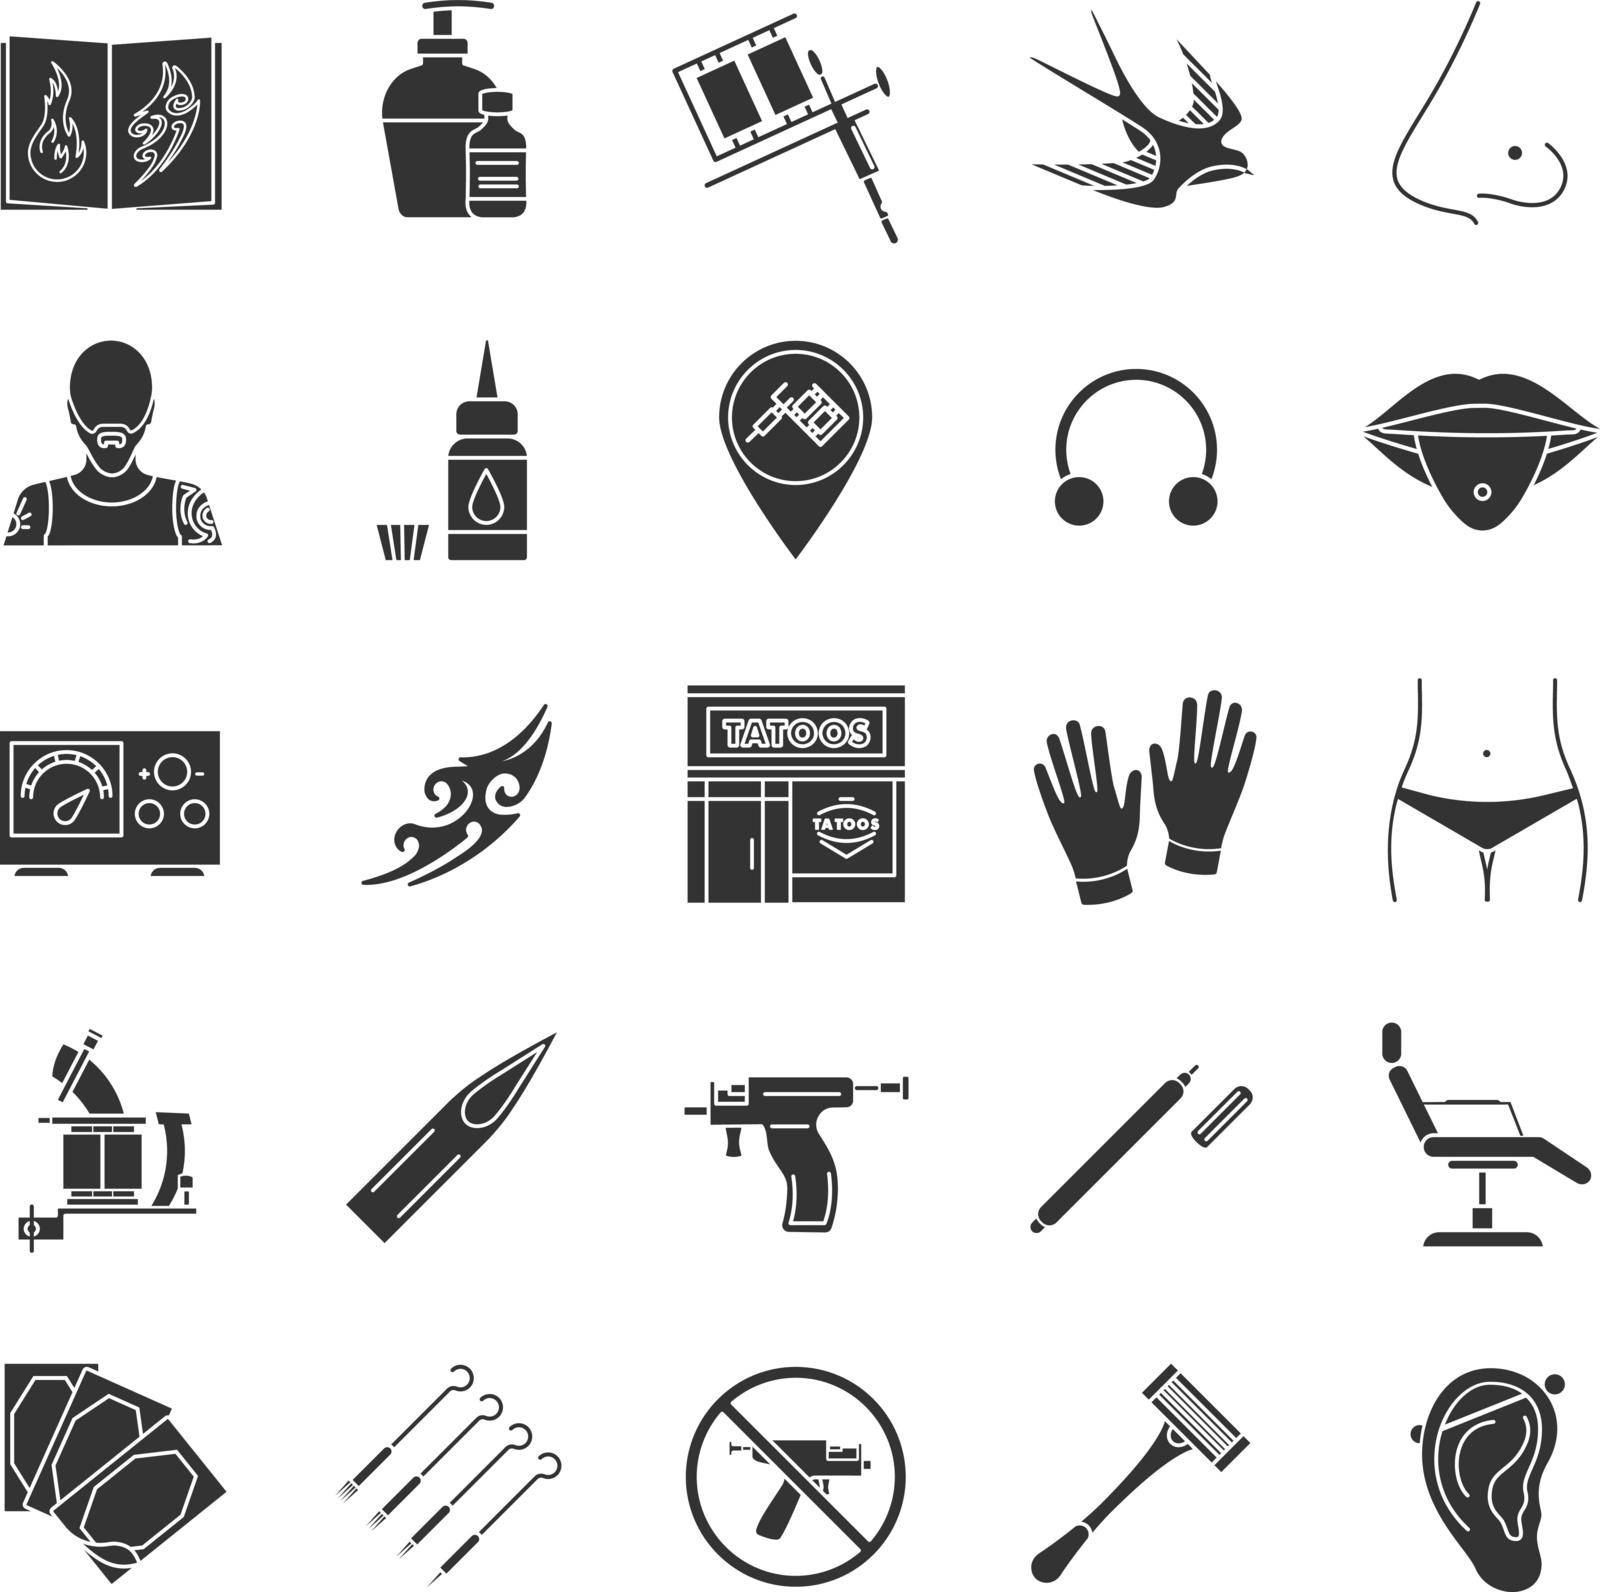 Tattoo studio glyph icons set. Piercing service. Tattoo sketches, instruments and equipment. Silhouette symbols. Vector isolated illustration